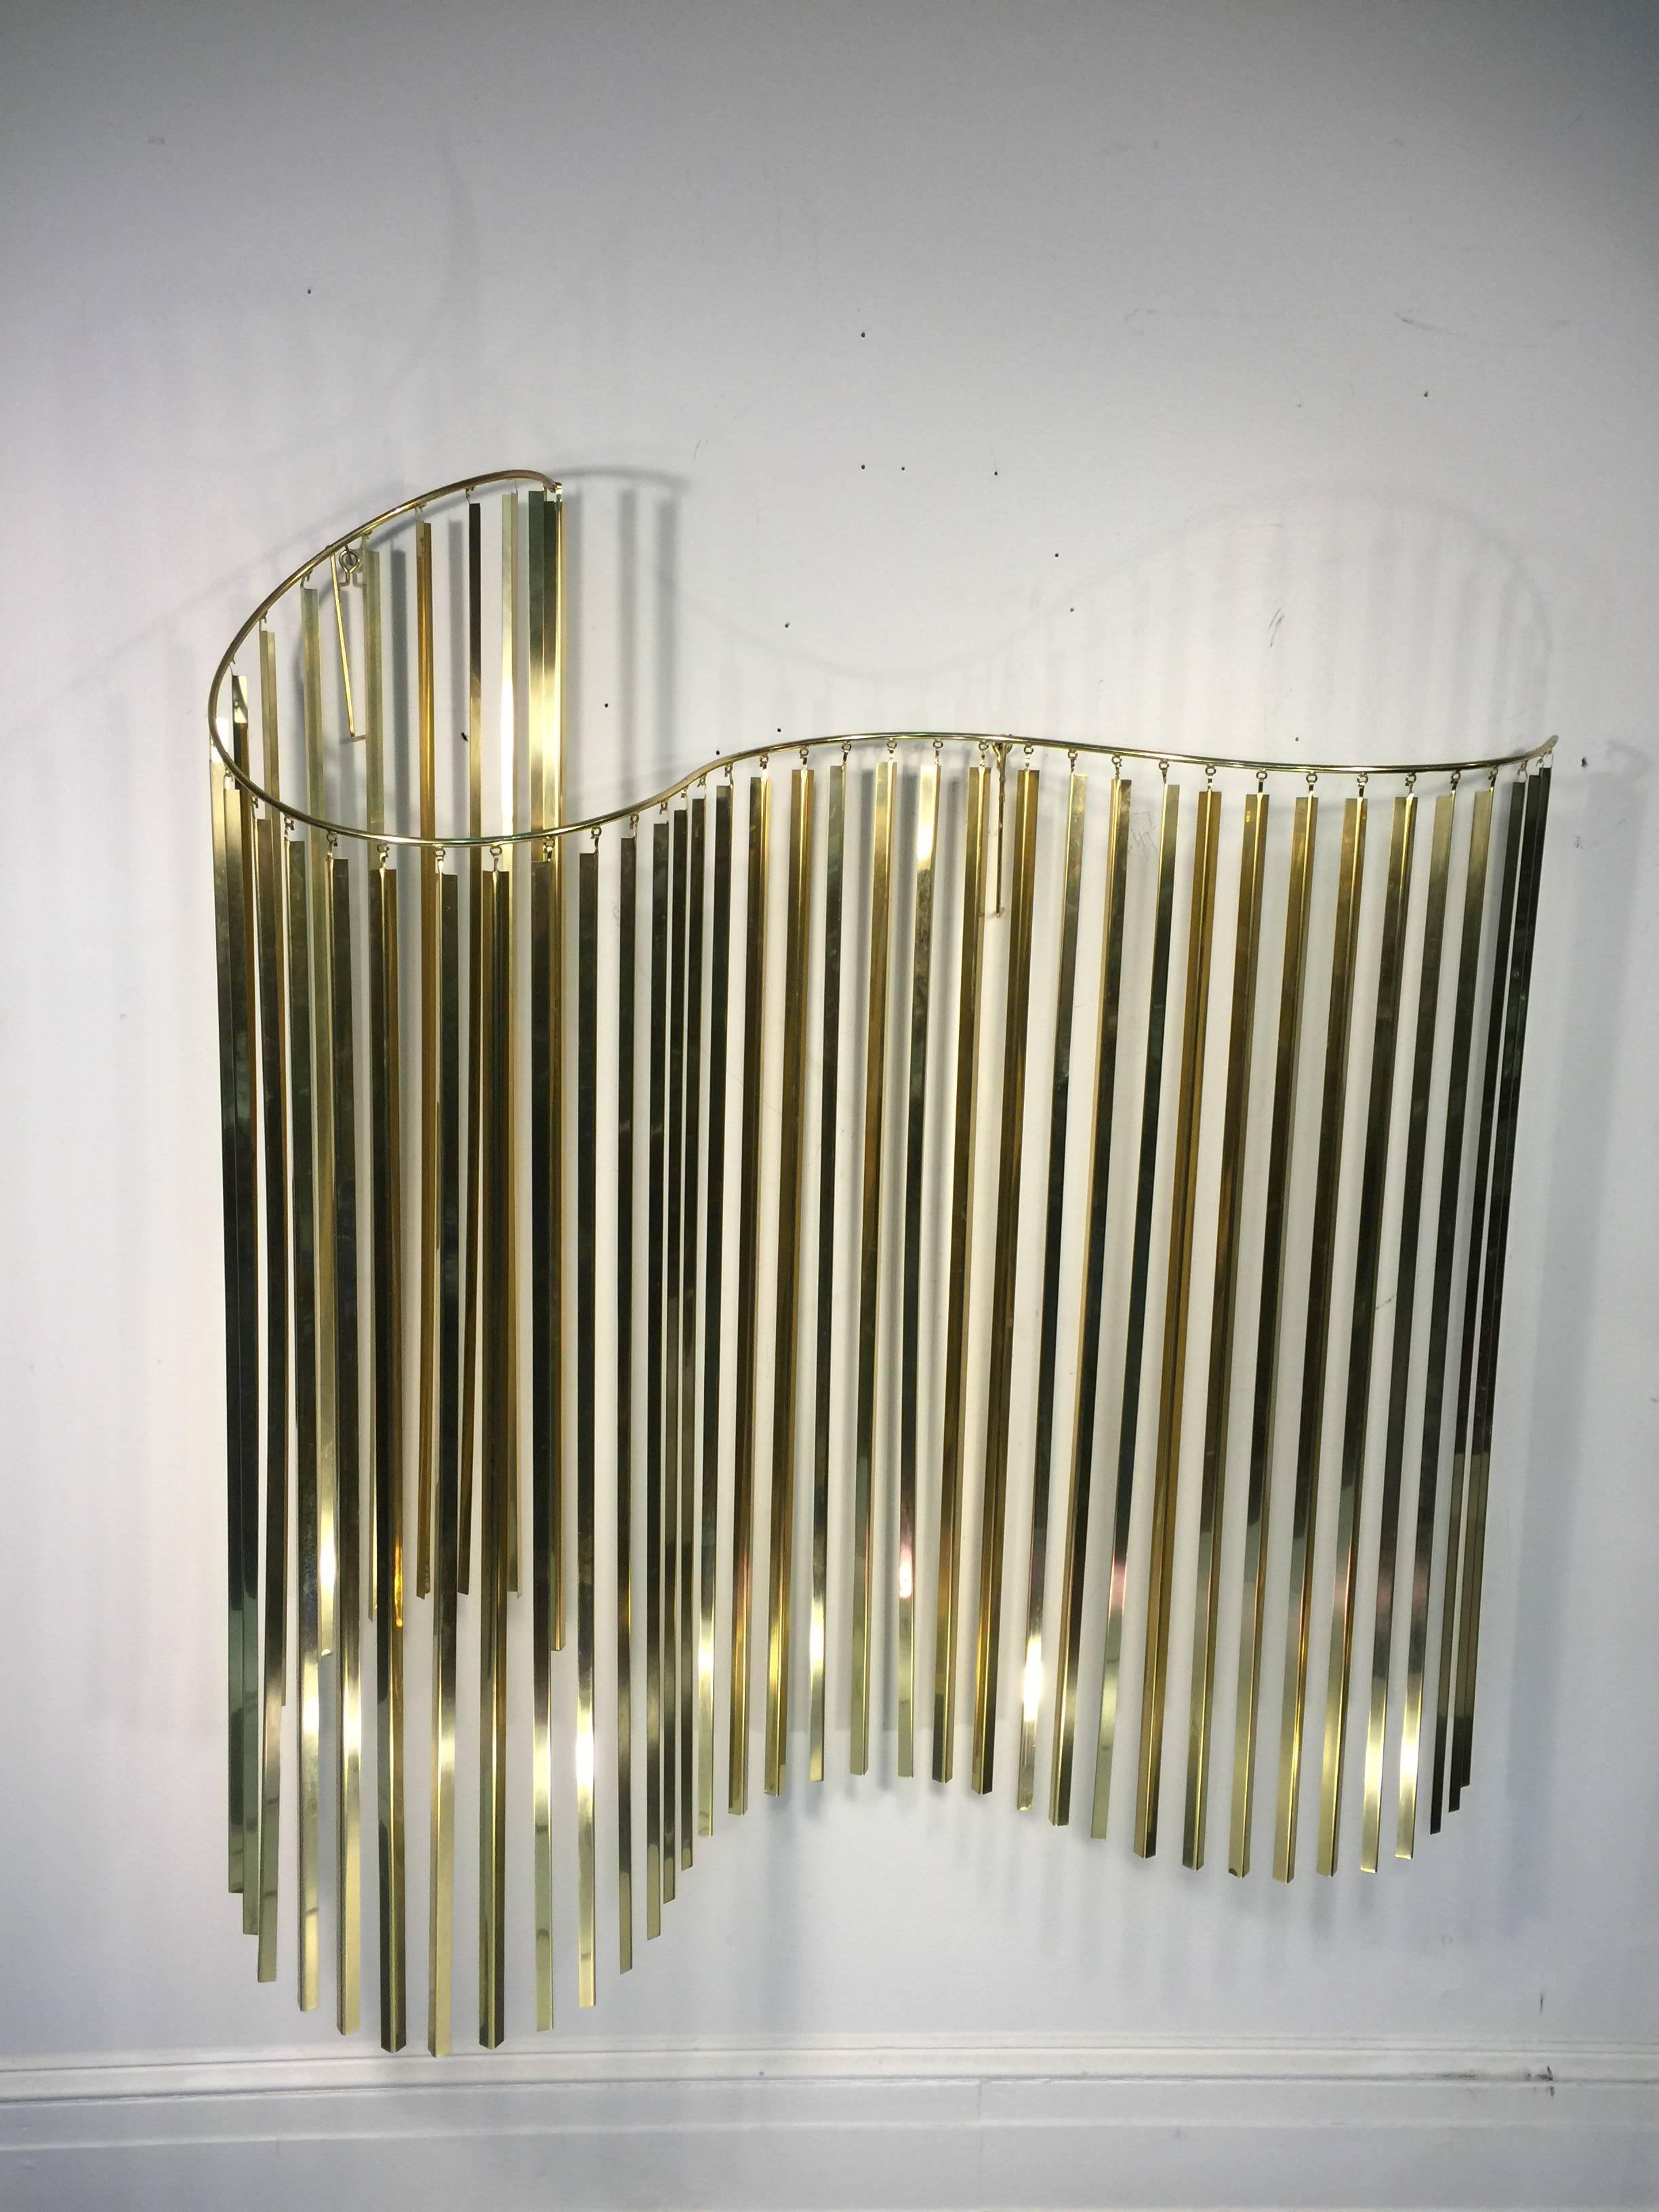 Modern Wonderful Curtis Jere Kinetic Wave Form Chrome and Brass Wall Sculpture For Sale